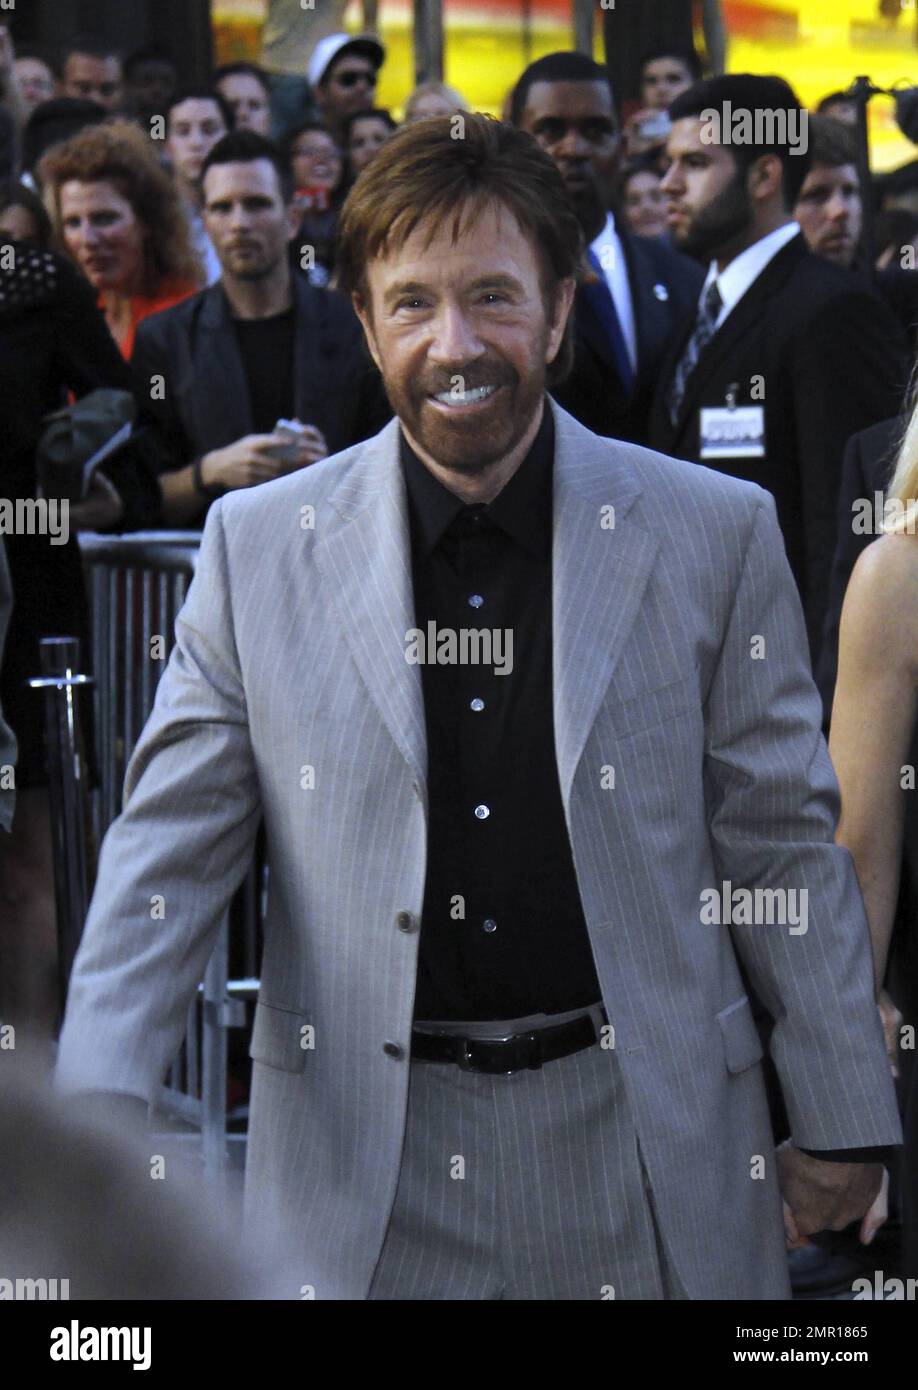 Chuck Norris arrives at the premiere of 'The Expendables 2' at Grauman's Chinese Theatre. Los Angeles, CA. 15th August 2012. Stock Photo